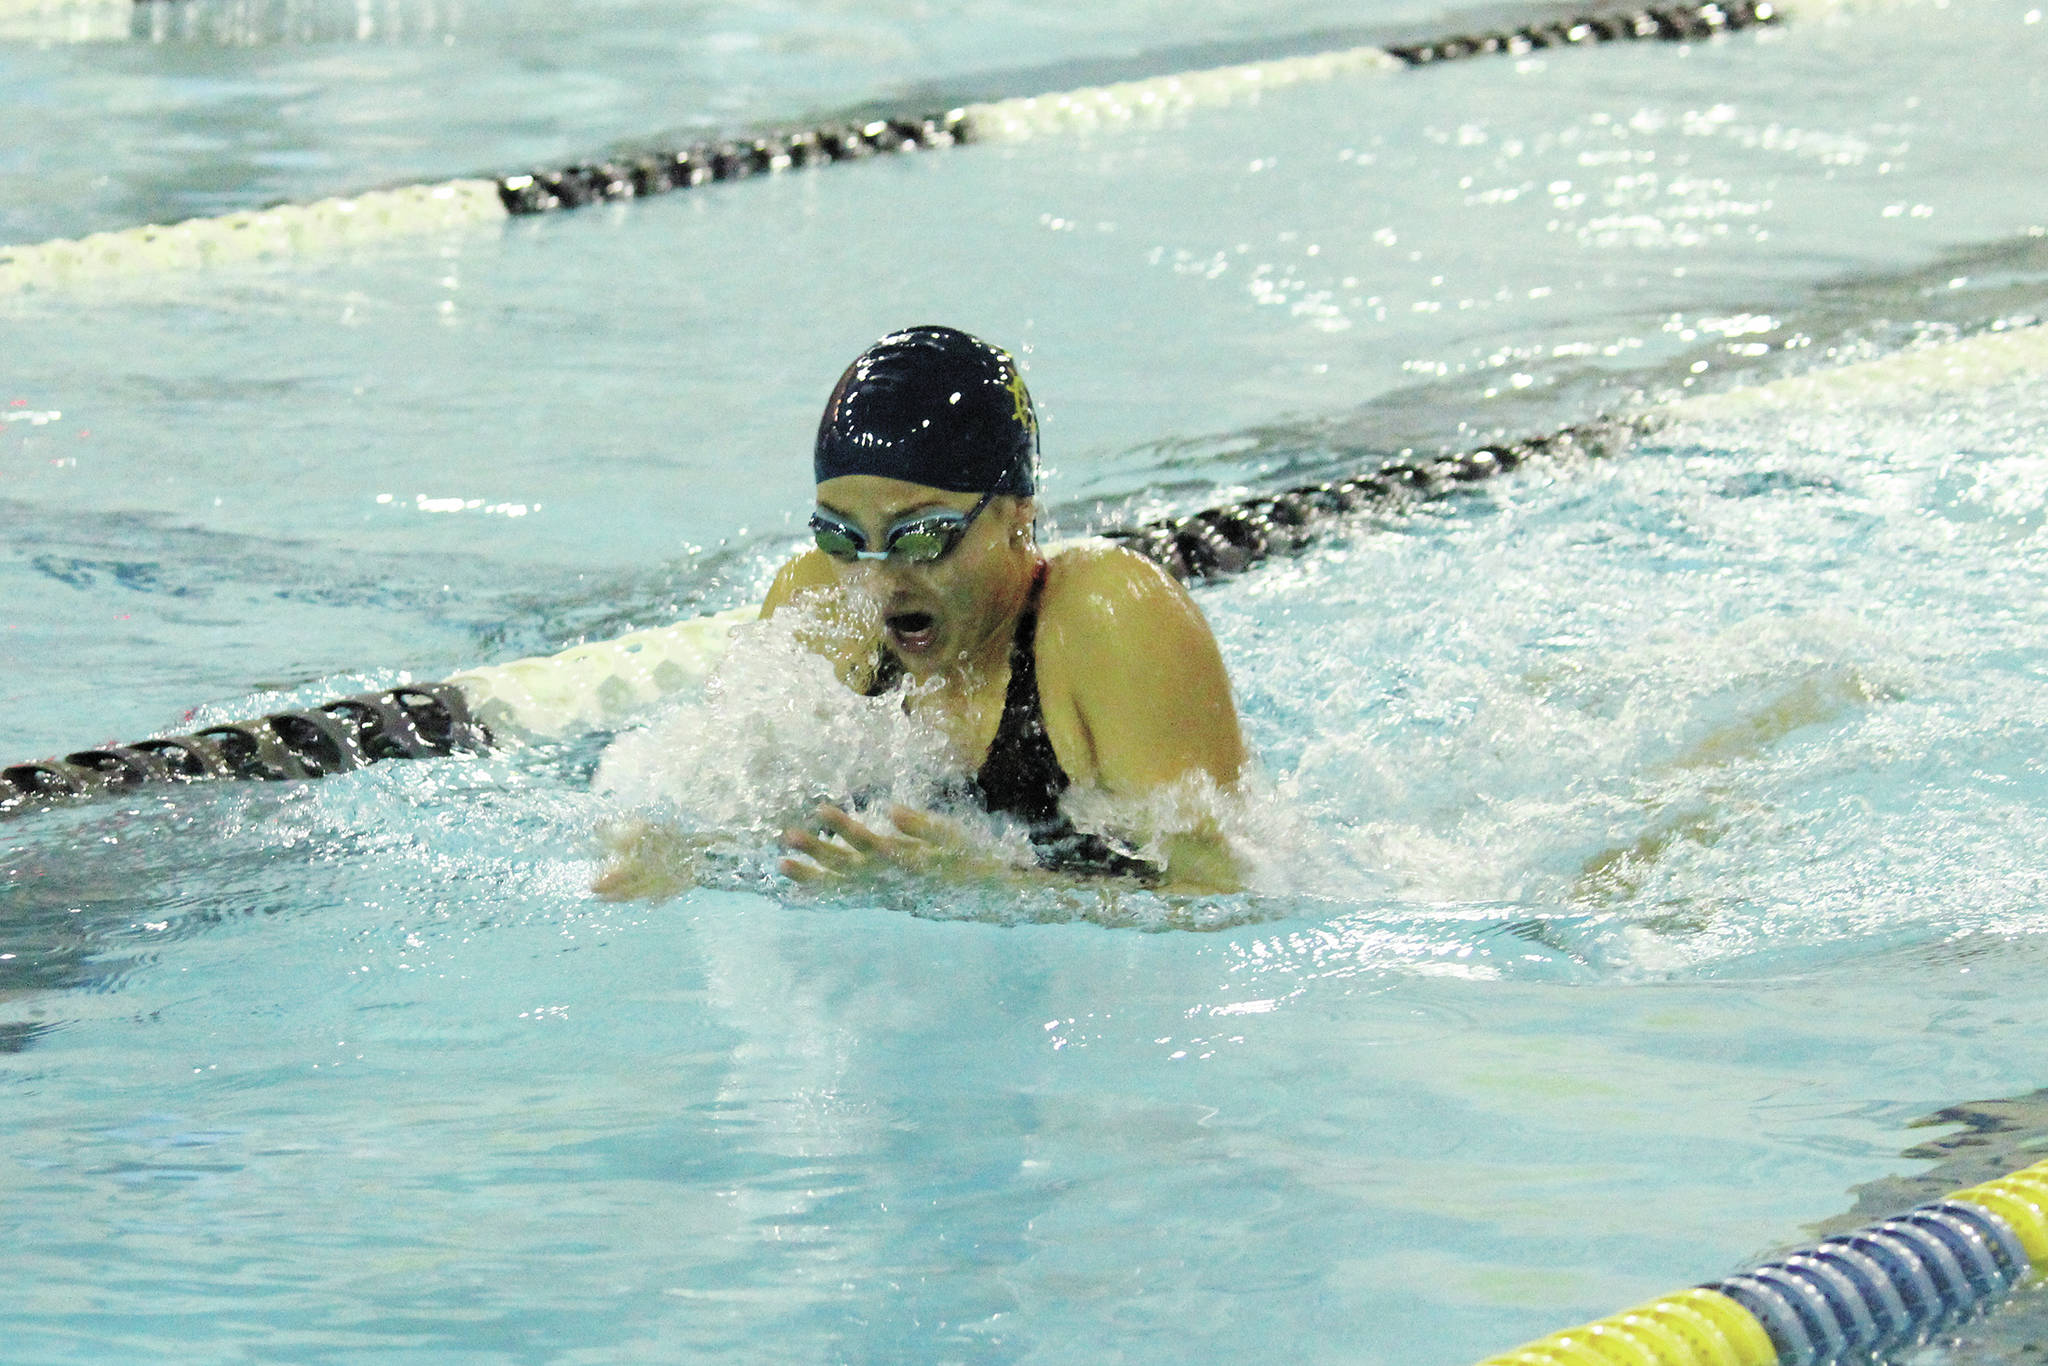 Homer’s Madison Story swims the breaststroke leg of the girls 200 yard medley relay Friday, Oct. 2, 2020 during a dual meet against Seward High School at the Kate Kuhns Aquatic Center in Homer, Alaska. (Photo by Megan Pacer/Homer News)